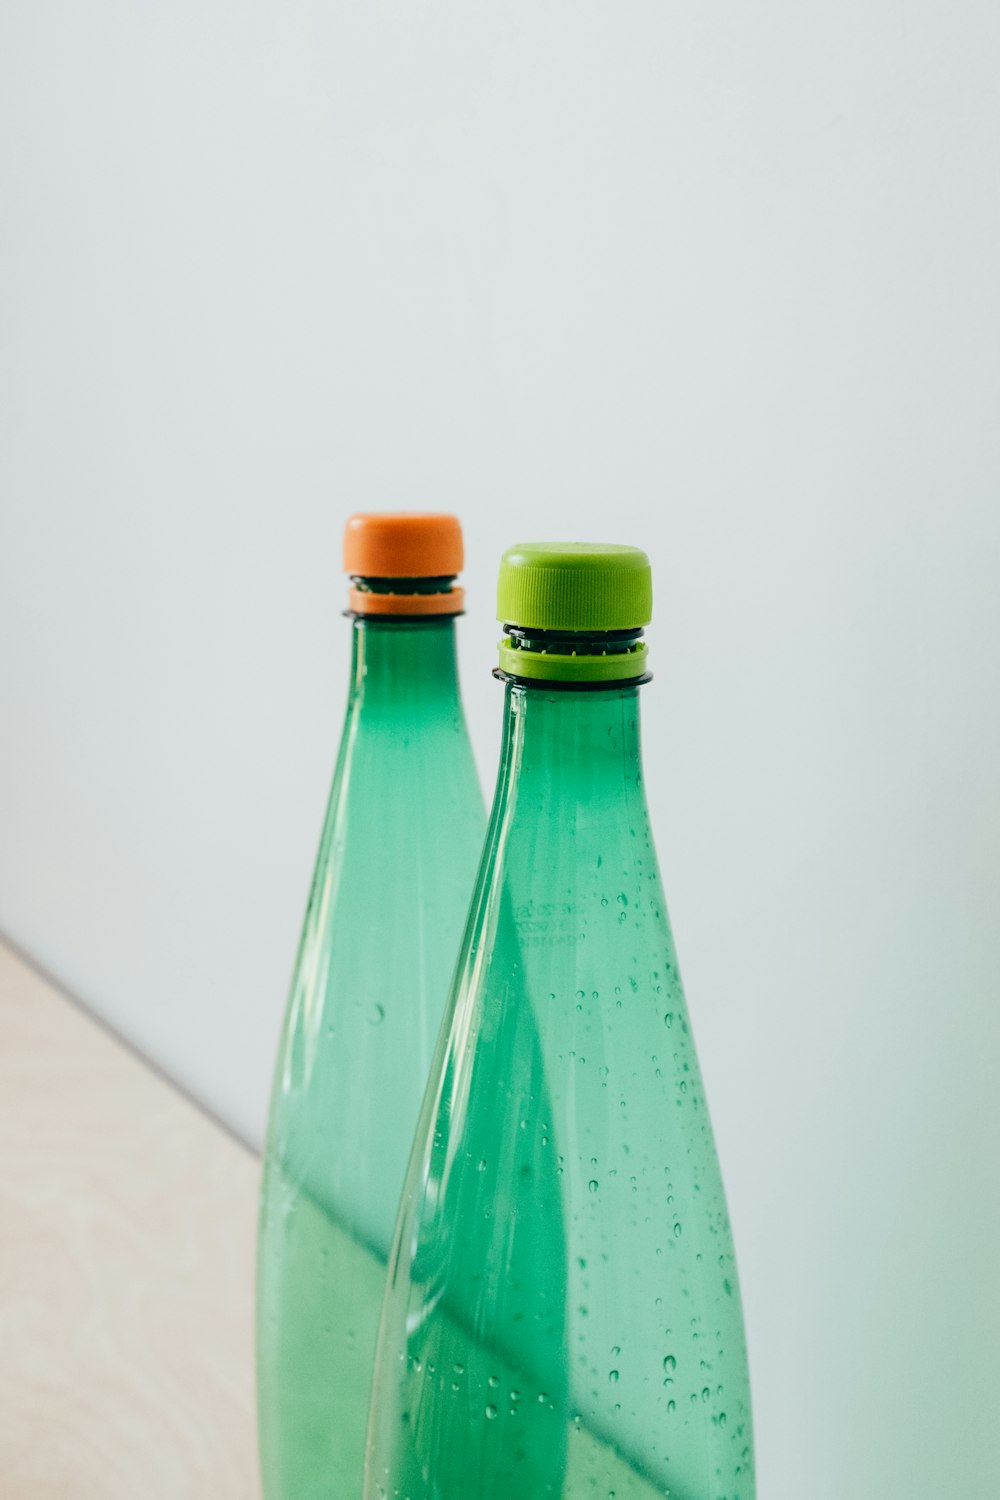 blue glass bottle with green liquid